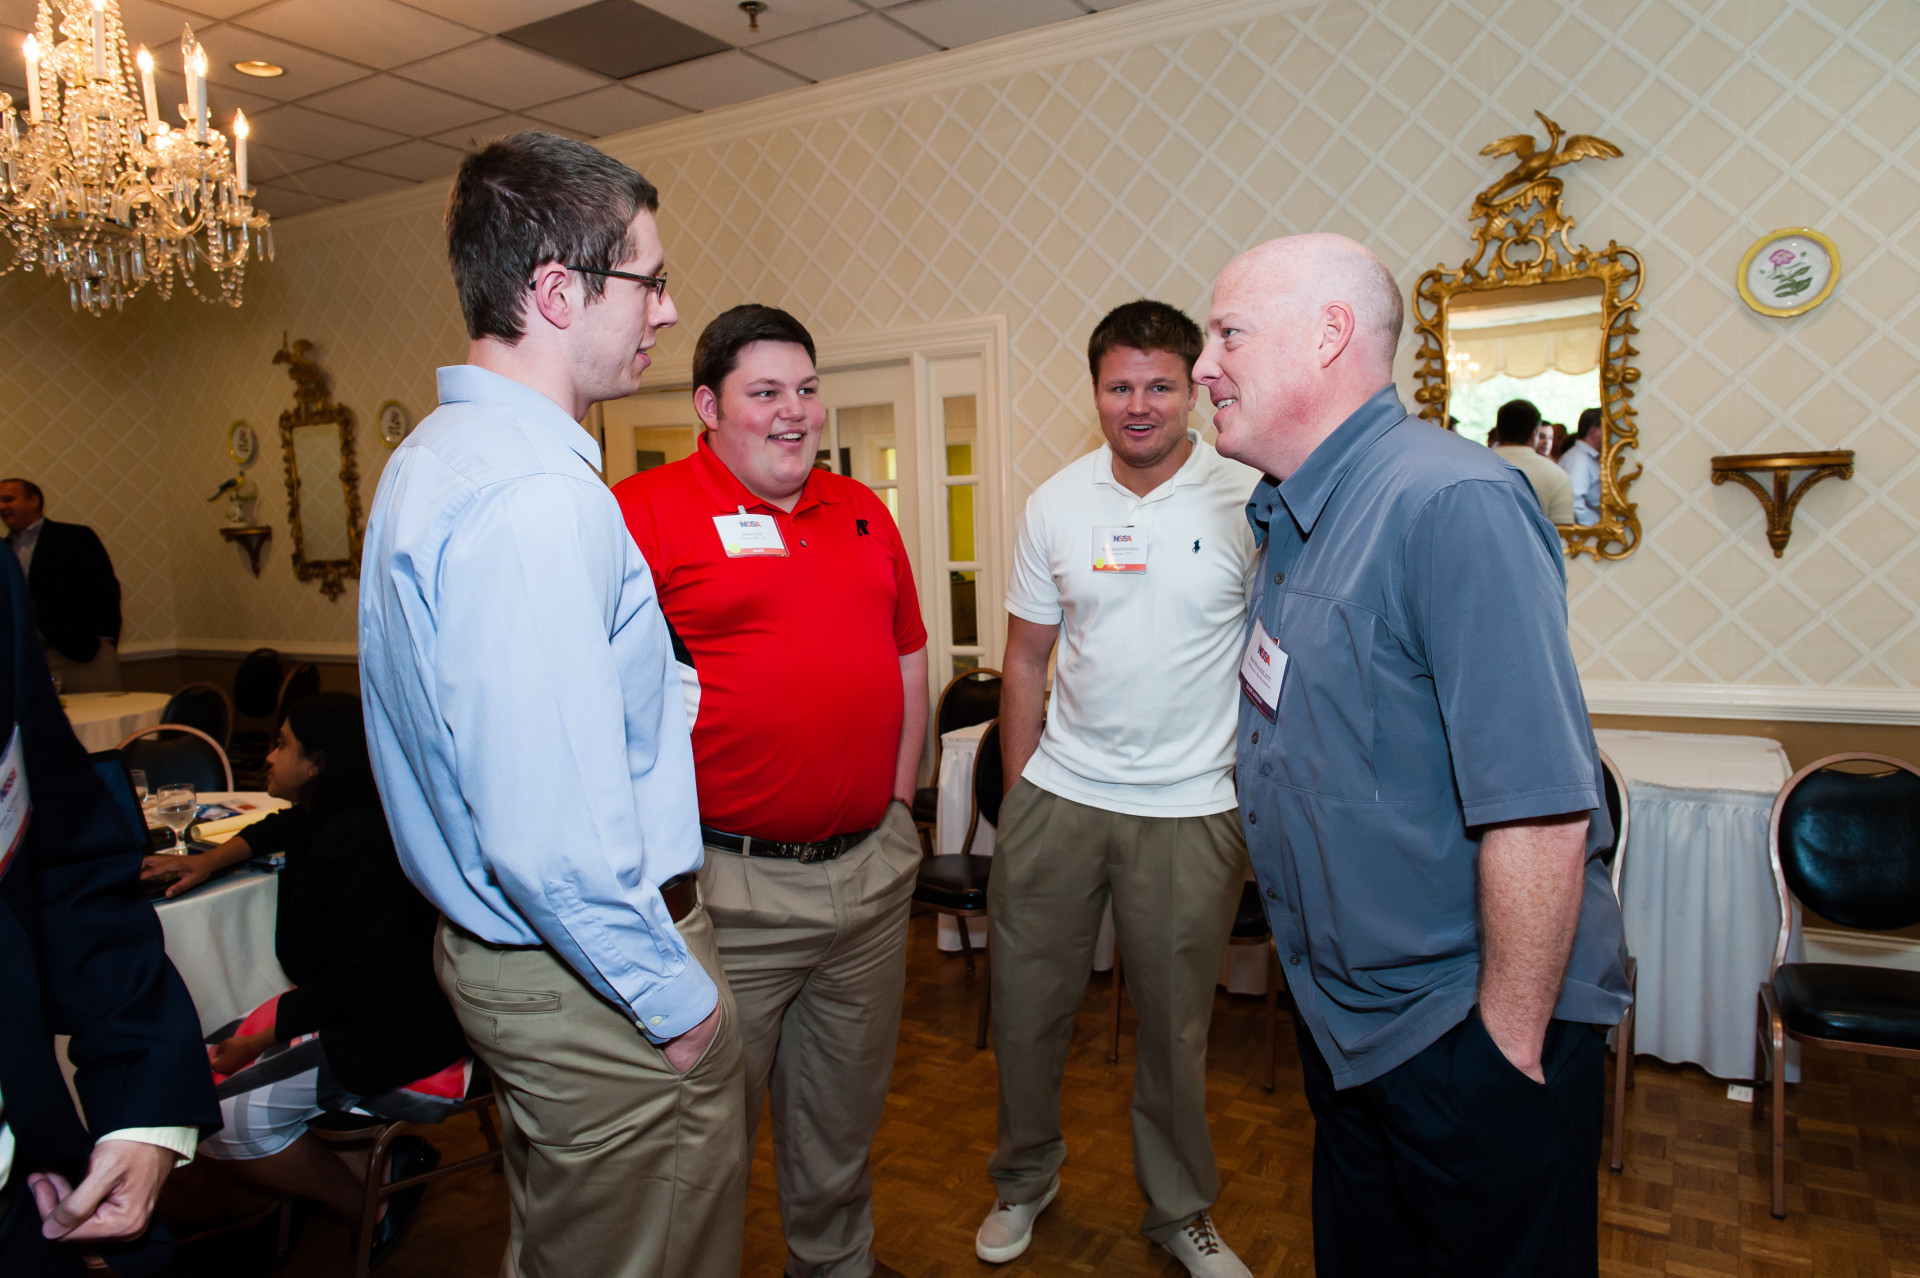 Rod Bramblett, far right, participated in the NSMA Seminars during the 2014 Awards Weekend